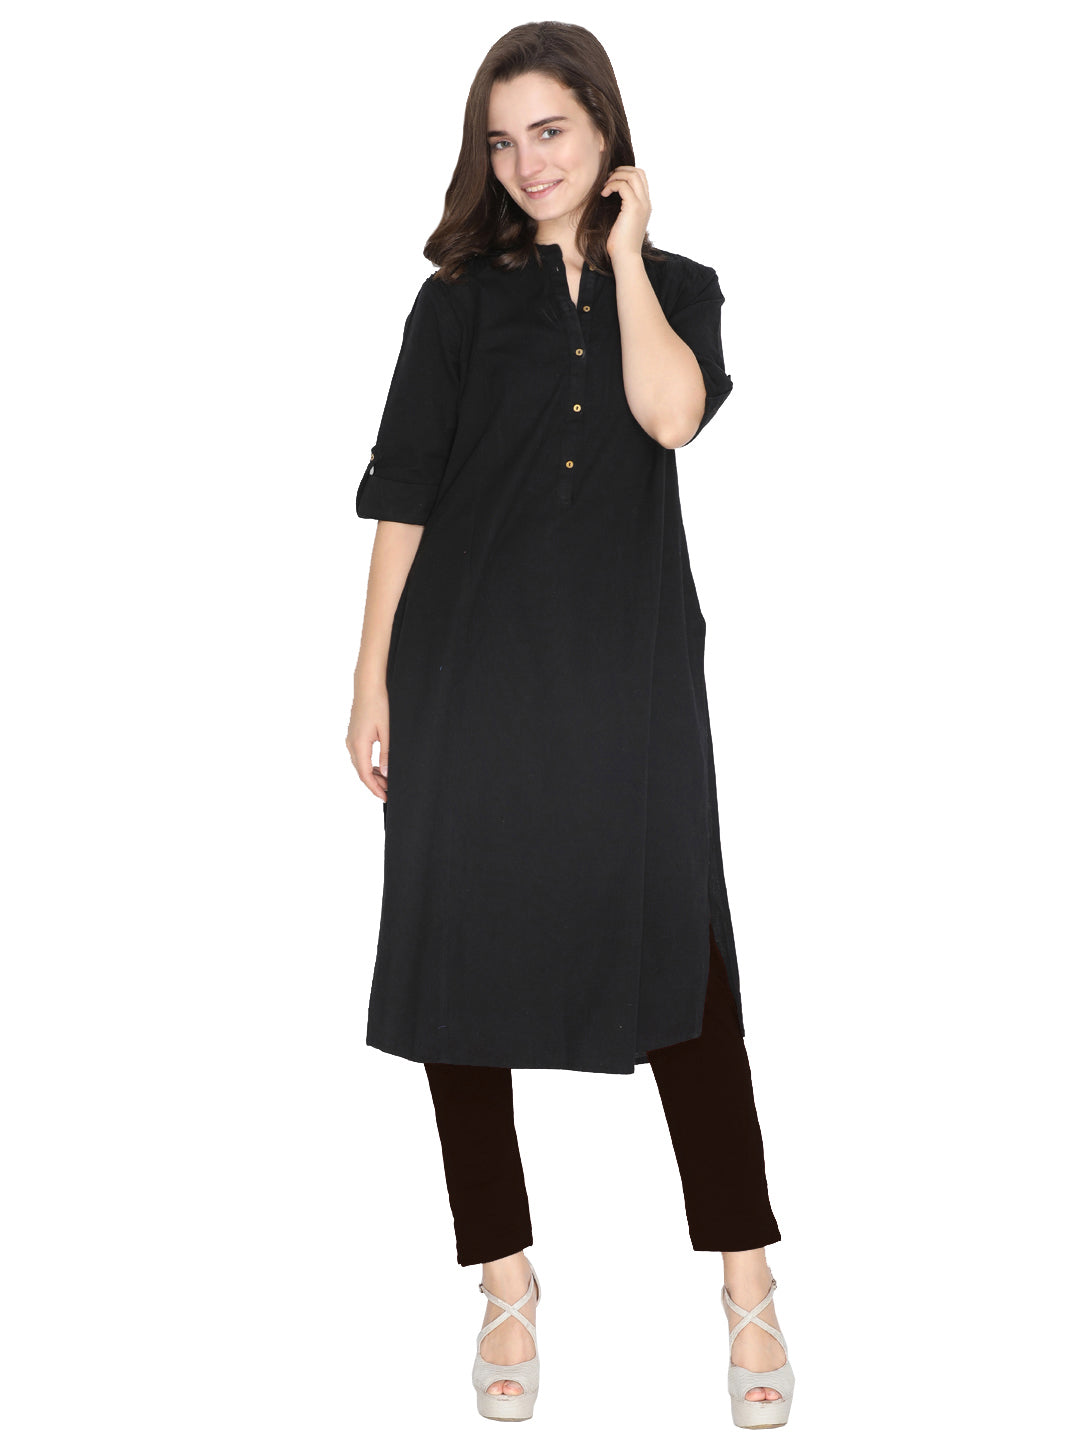 Lyra kurti pants in Delhi at best price by Chhabra Cloth House  Justdial